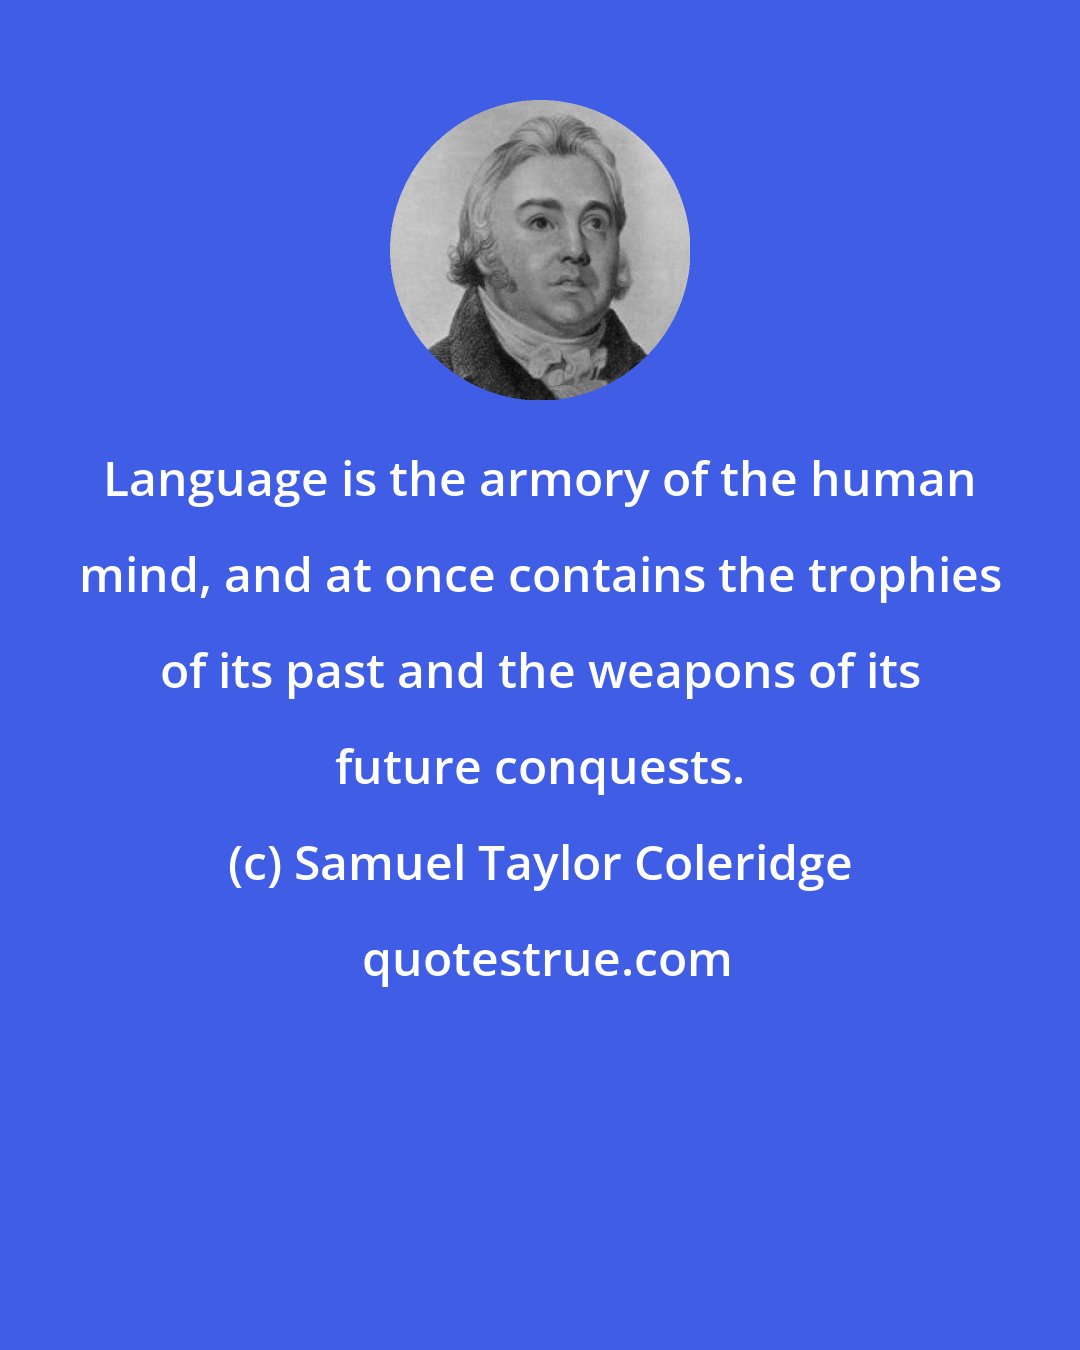 Samuel Taylor Coleridge: Language is the armory of the human mind, and at once contains the trophies of its past and the weapons of its future conquests.